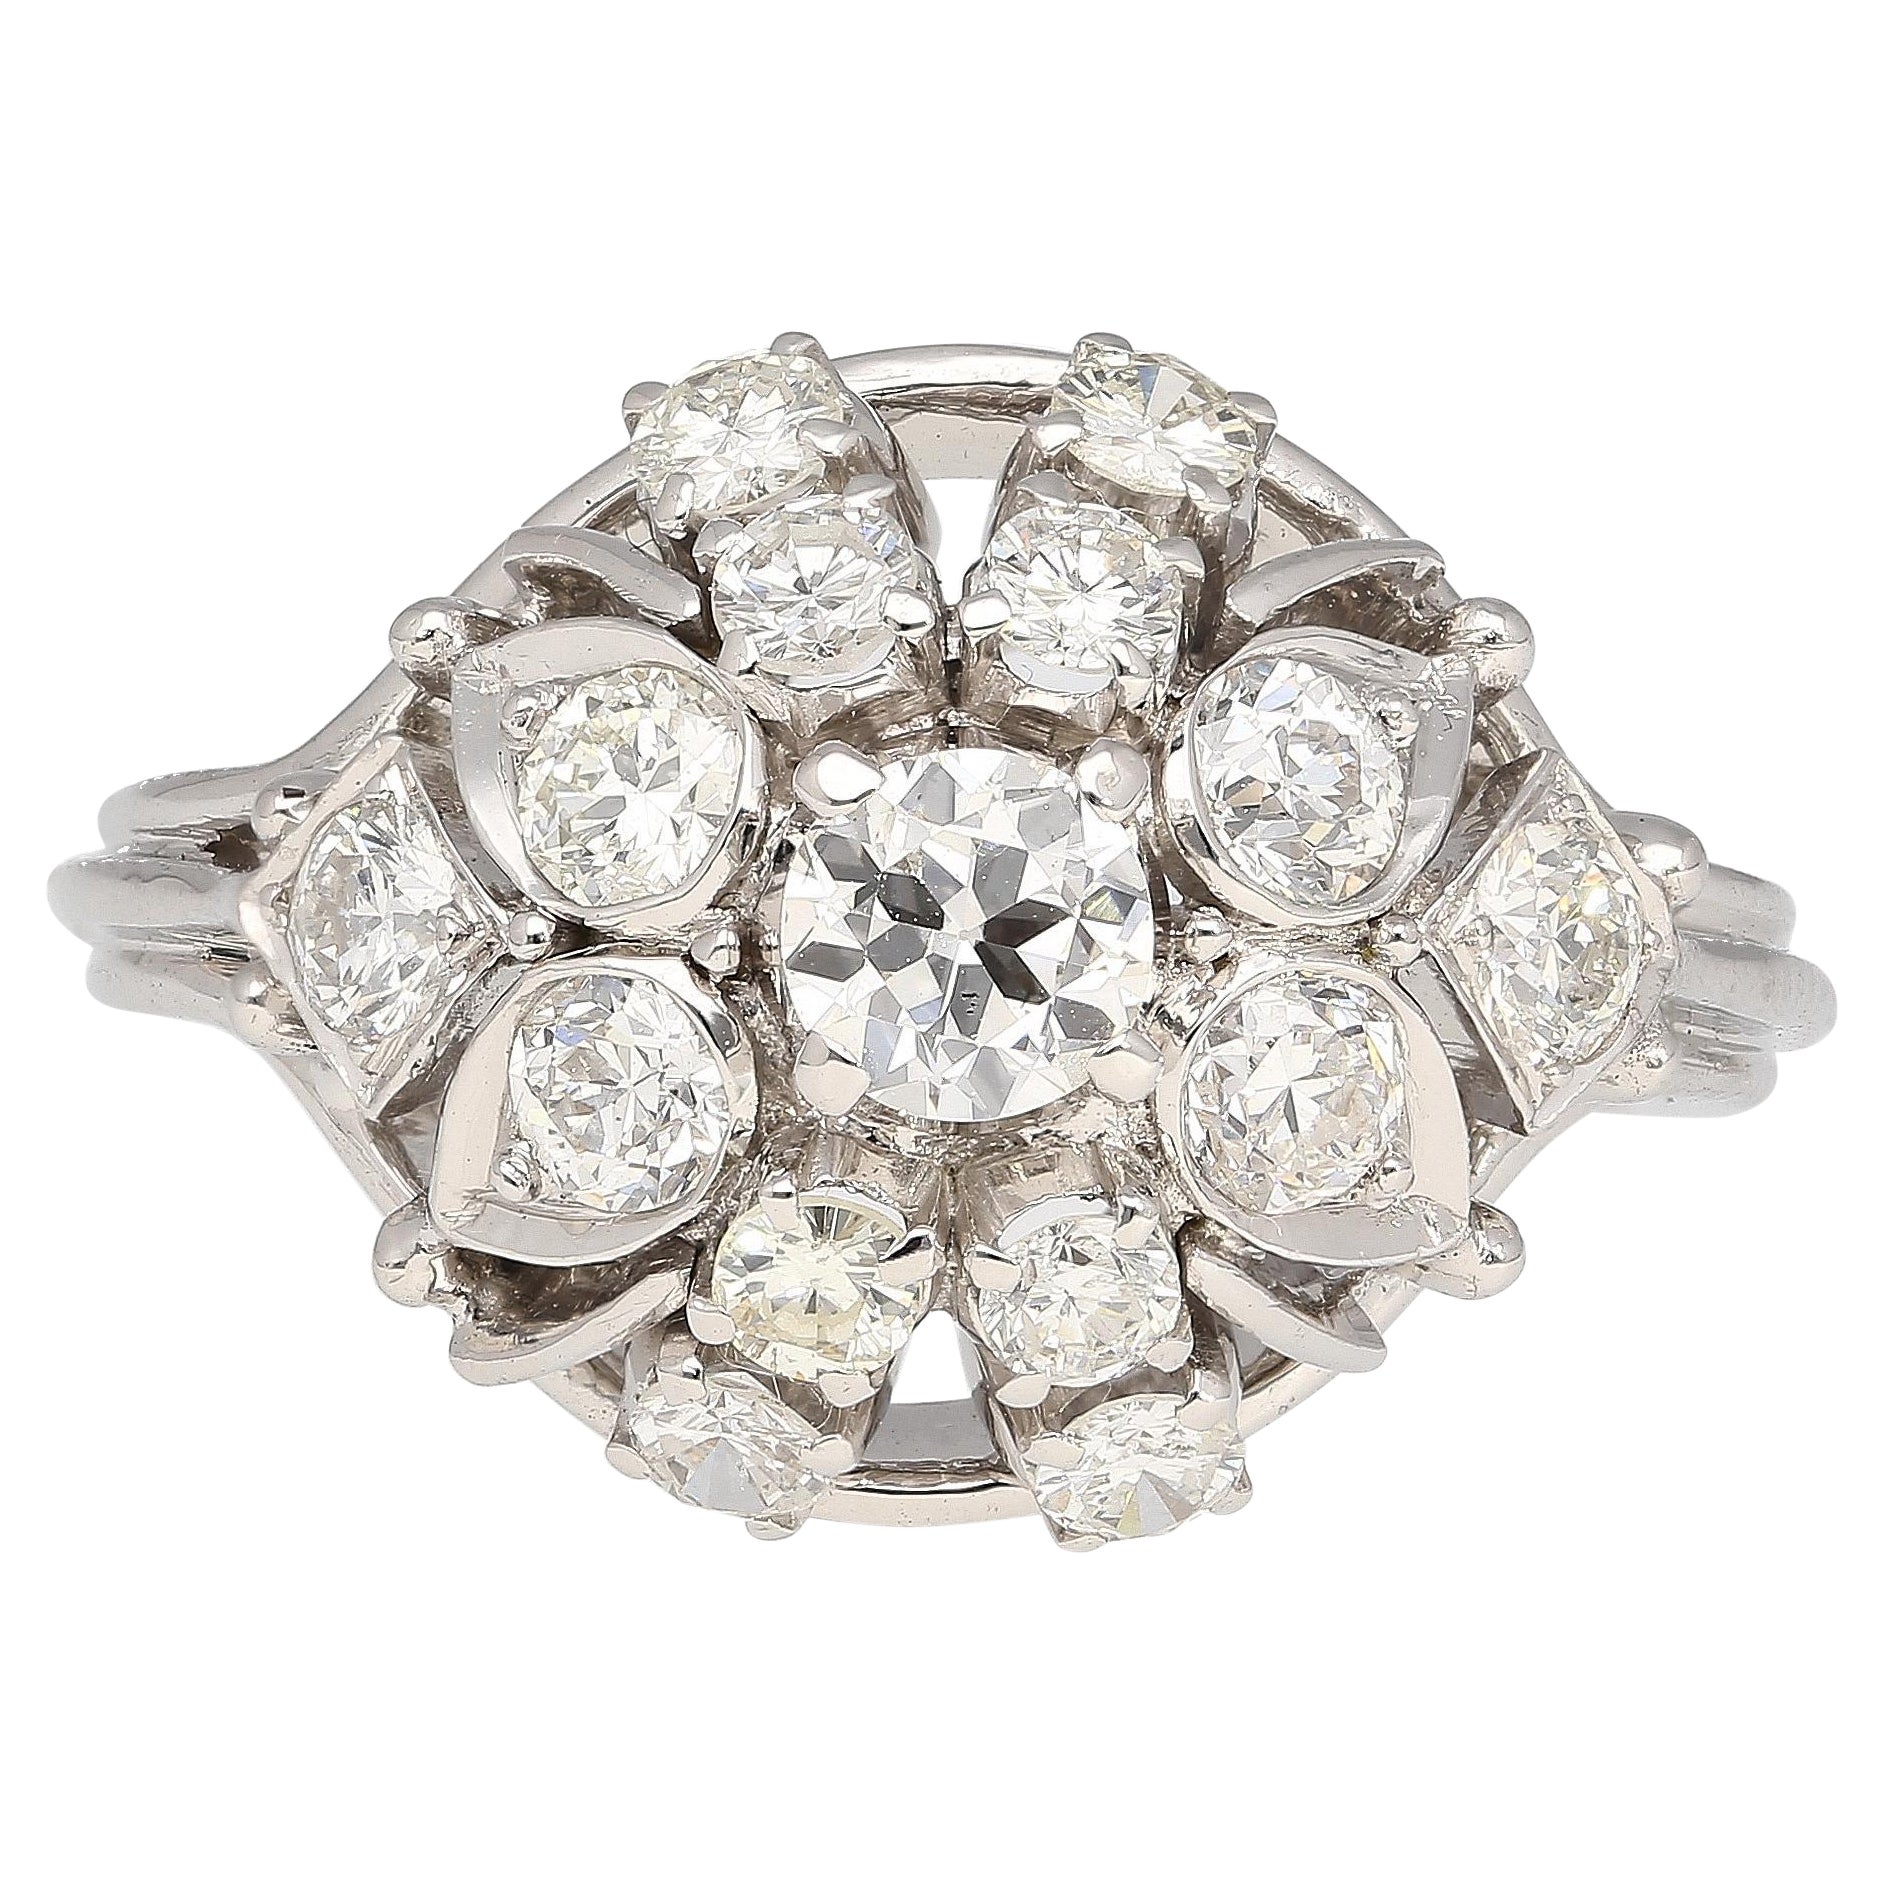 Vintage 1.30 Carat Old Euro-Cut Diamond Flower Ring in 14k White Gold For Sale